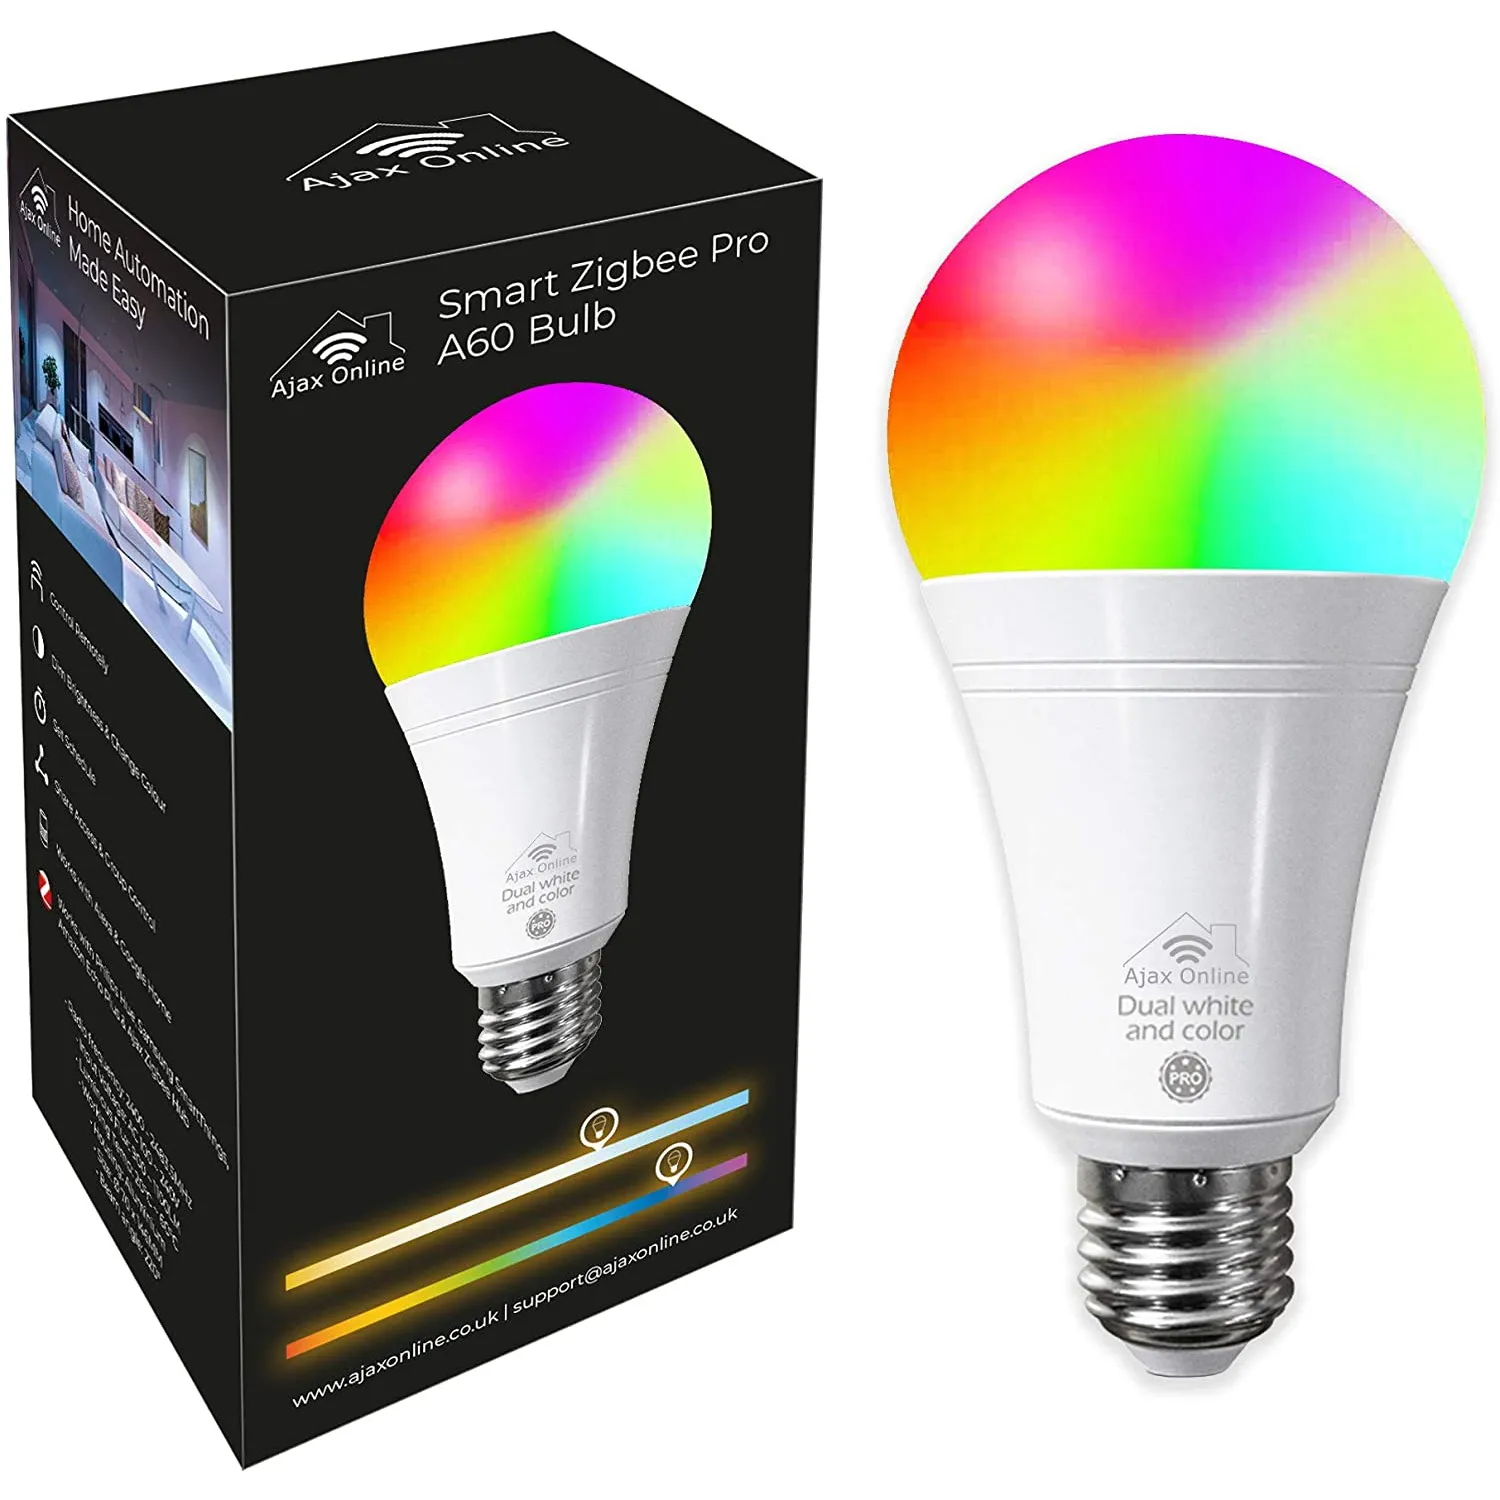 Dual White and Color Pro Bulb